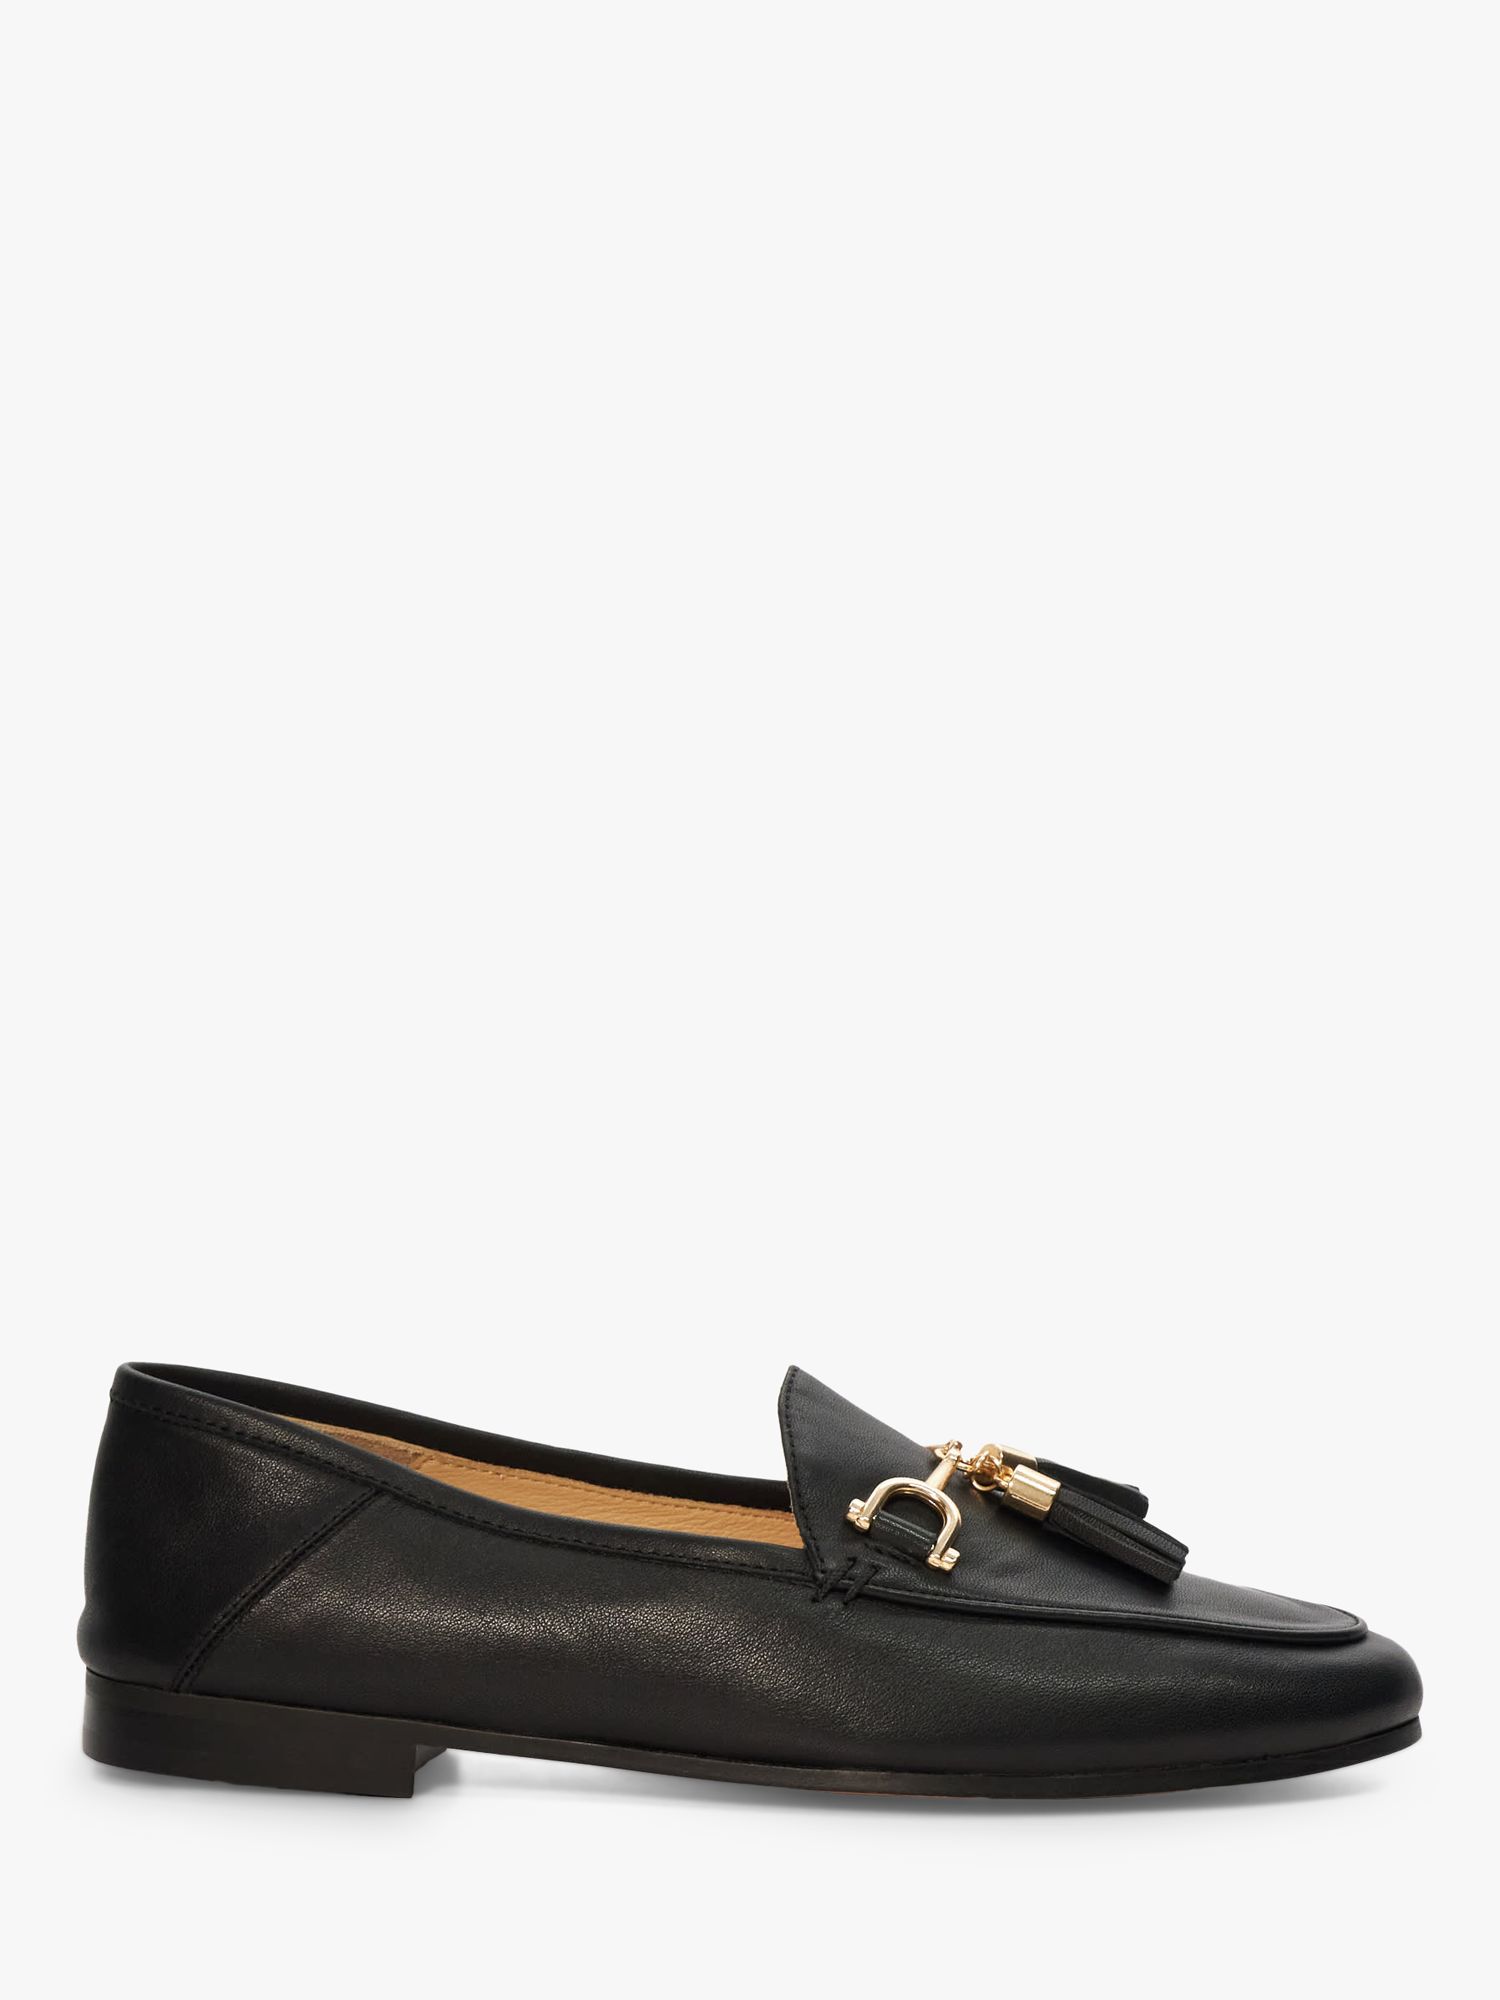 Dune Graysons Leather Flexible Sole Tassel Loafers, Black at John Lewis ...